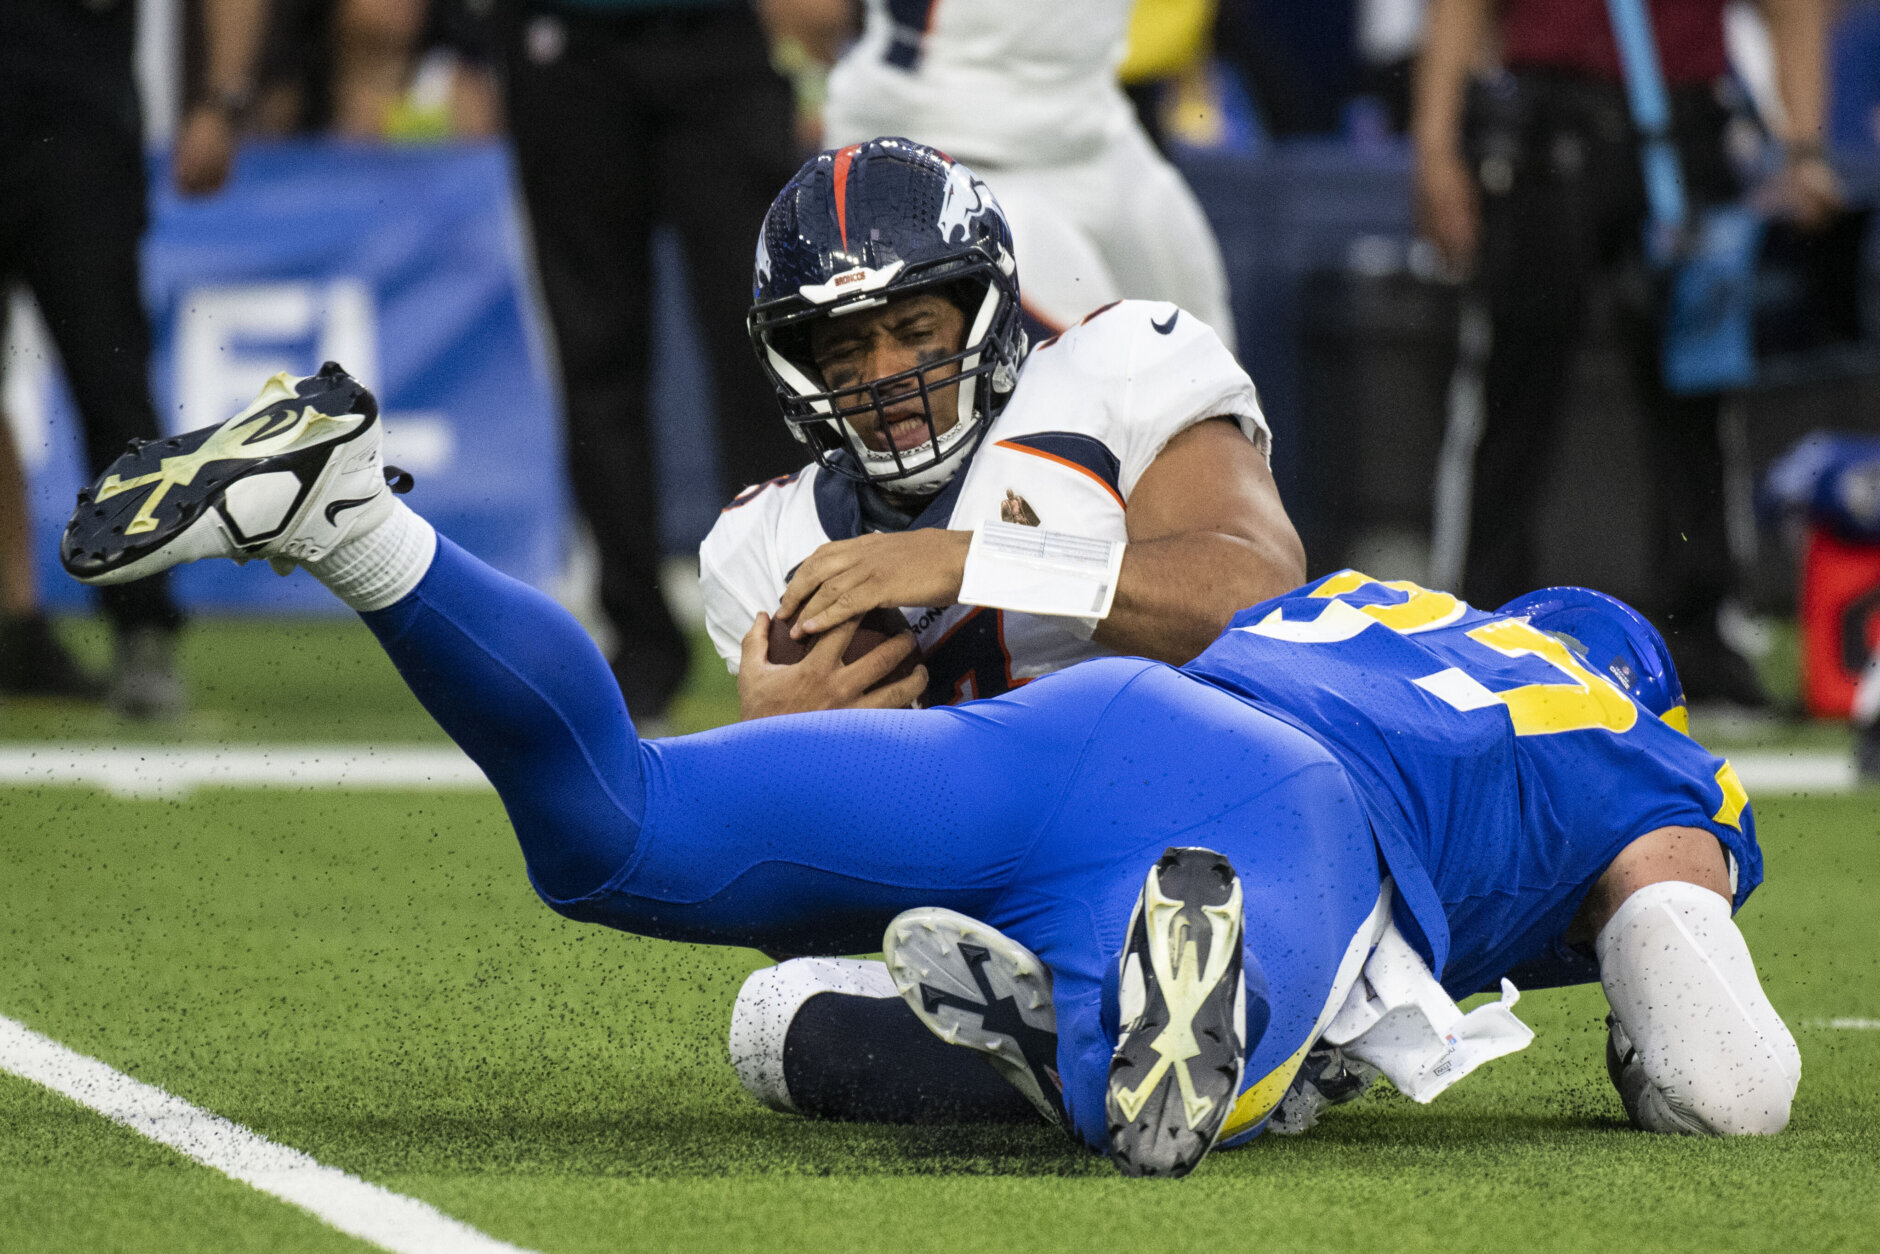 <p><em><strong>Broncos 14</strong></em><br />
<em><strong>Rams 51</strong></em></p>
<p>Imagine giving up the bevy of picks, players and money for Russell Wilson that Denver did, only to watch Baker Mayfield – just 12 days with his new team – play twice as well as Russ (and I mean that quite literally; Baker&#8217;s 124.7 passer rating was more than double Wilson&#8217;s 54.2) to lead the Rams to the biggest blowout victory in Christmas Day history that also drops the Broncos to 4-11. Denver needs a hard control-alt-delete – top to bottom.</p>
